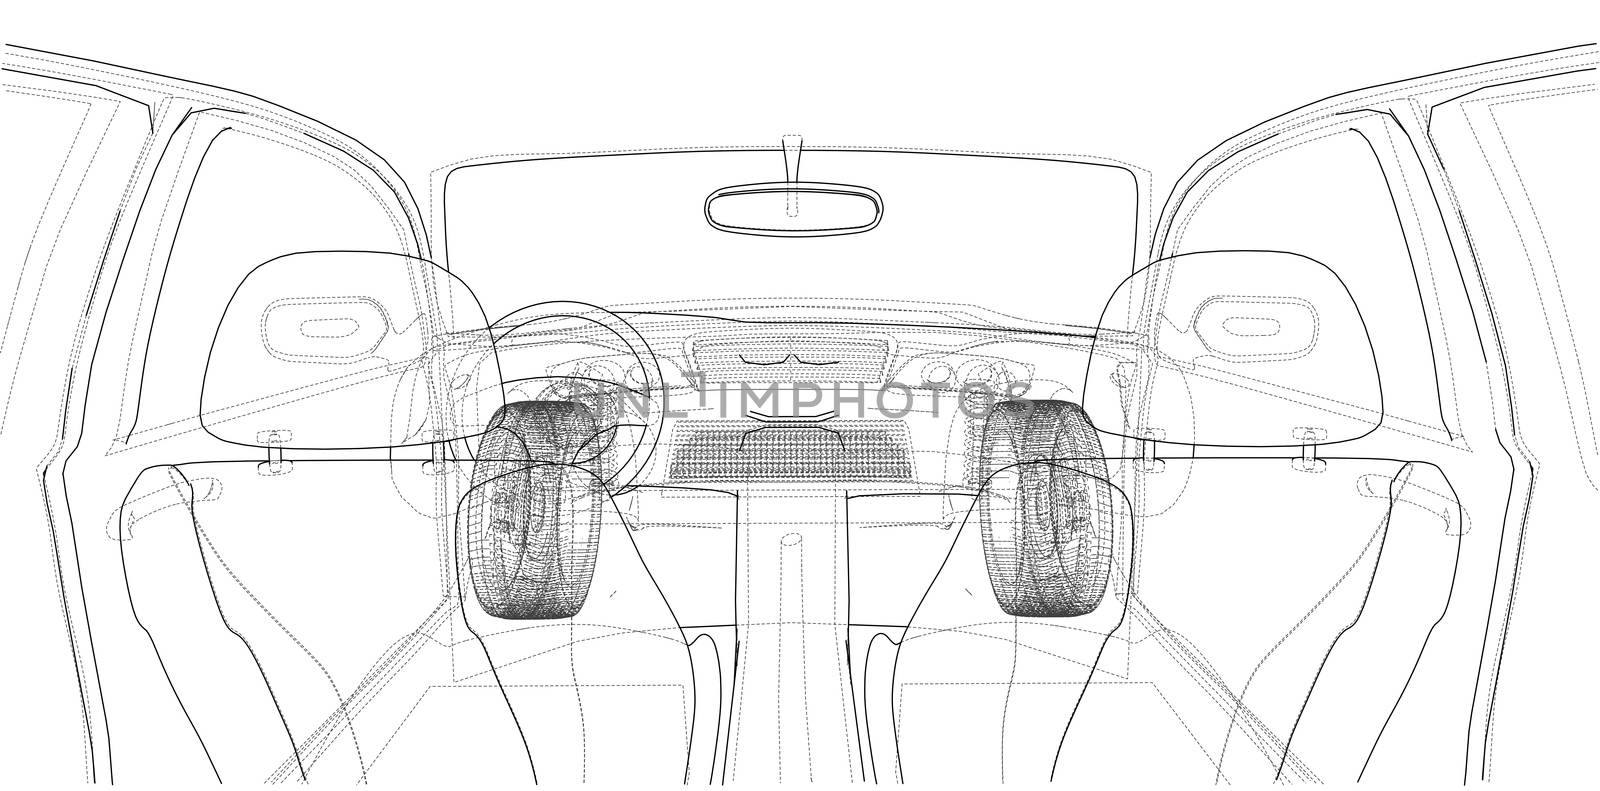 Concept car. 3d rendering. Wire-frame or blueprint style